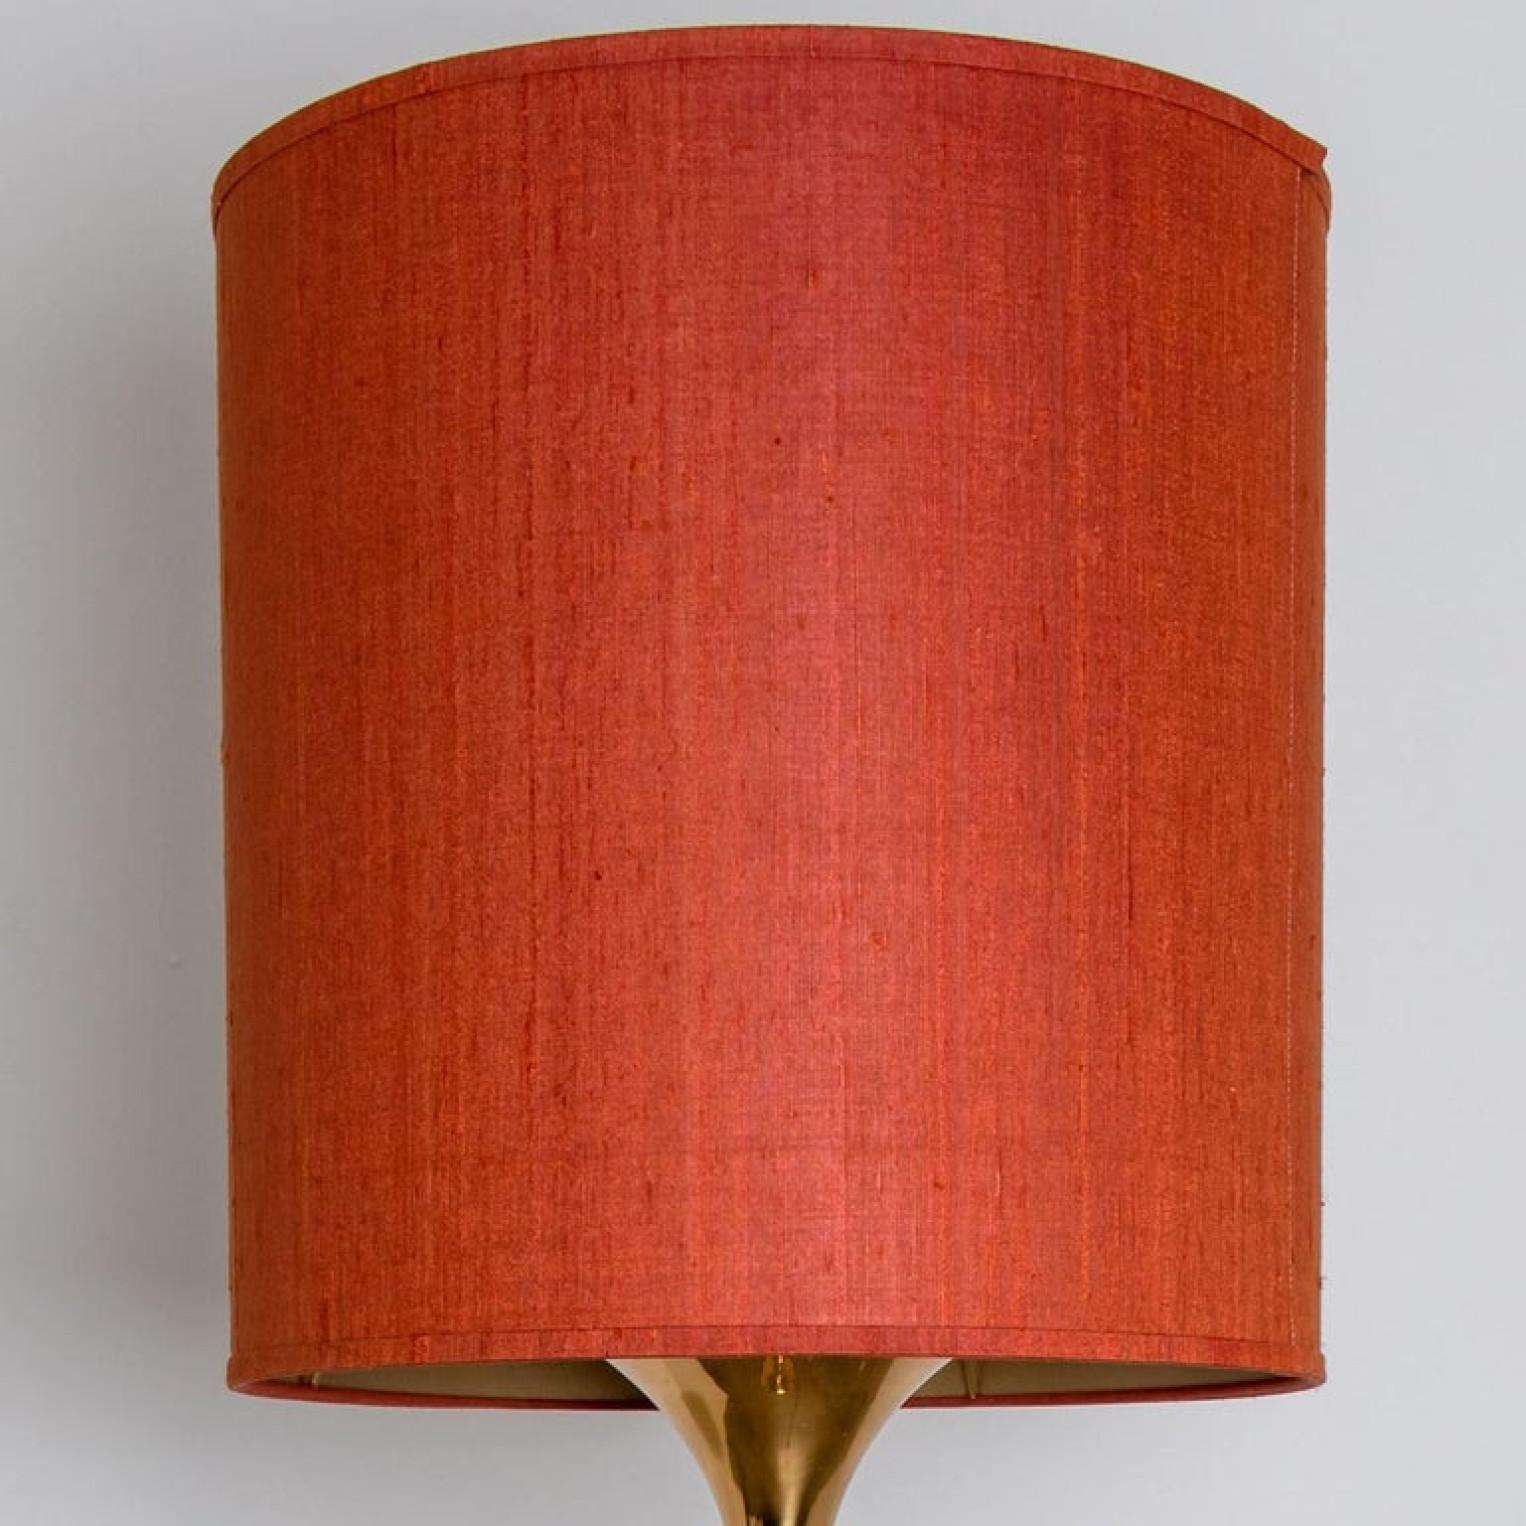 Pair of Table and Floor Lamp Designed by Ingo Maurer, 1968 For Sale 5